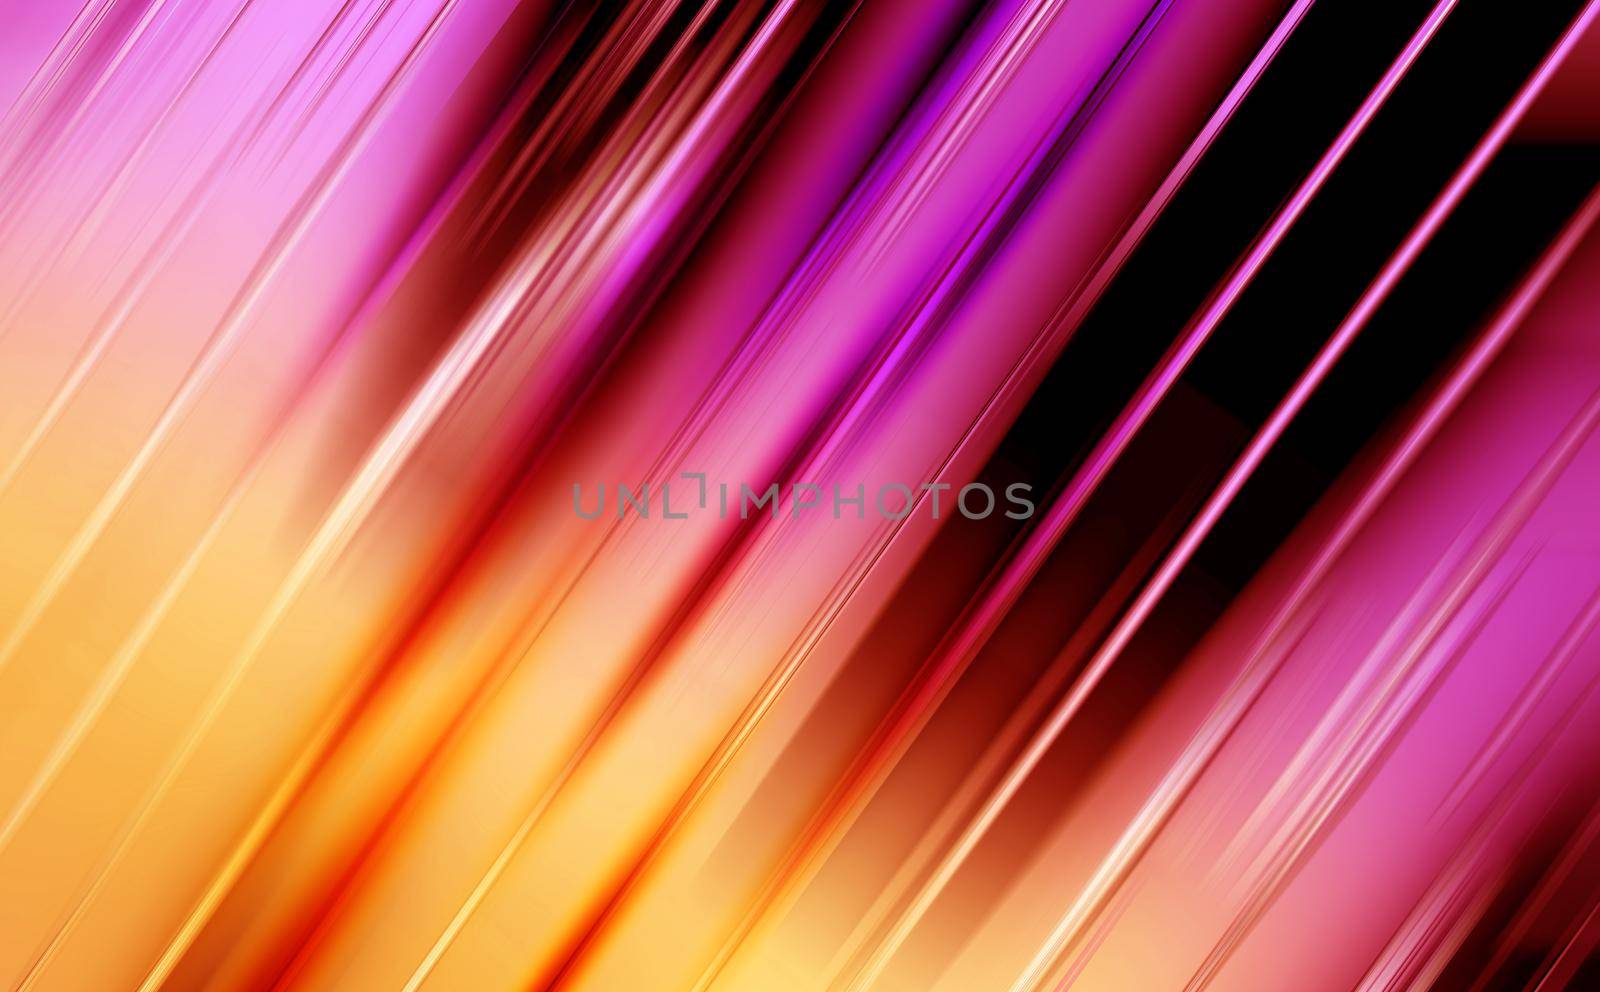 Abstract Blurred Yellowish Pink Bar Panels Background. by welcomia